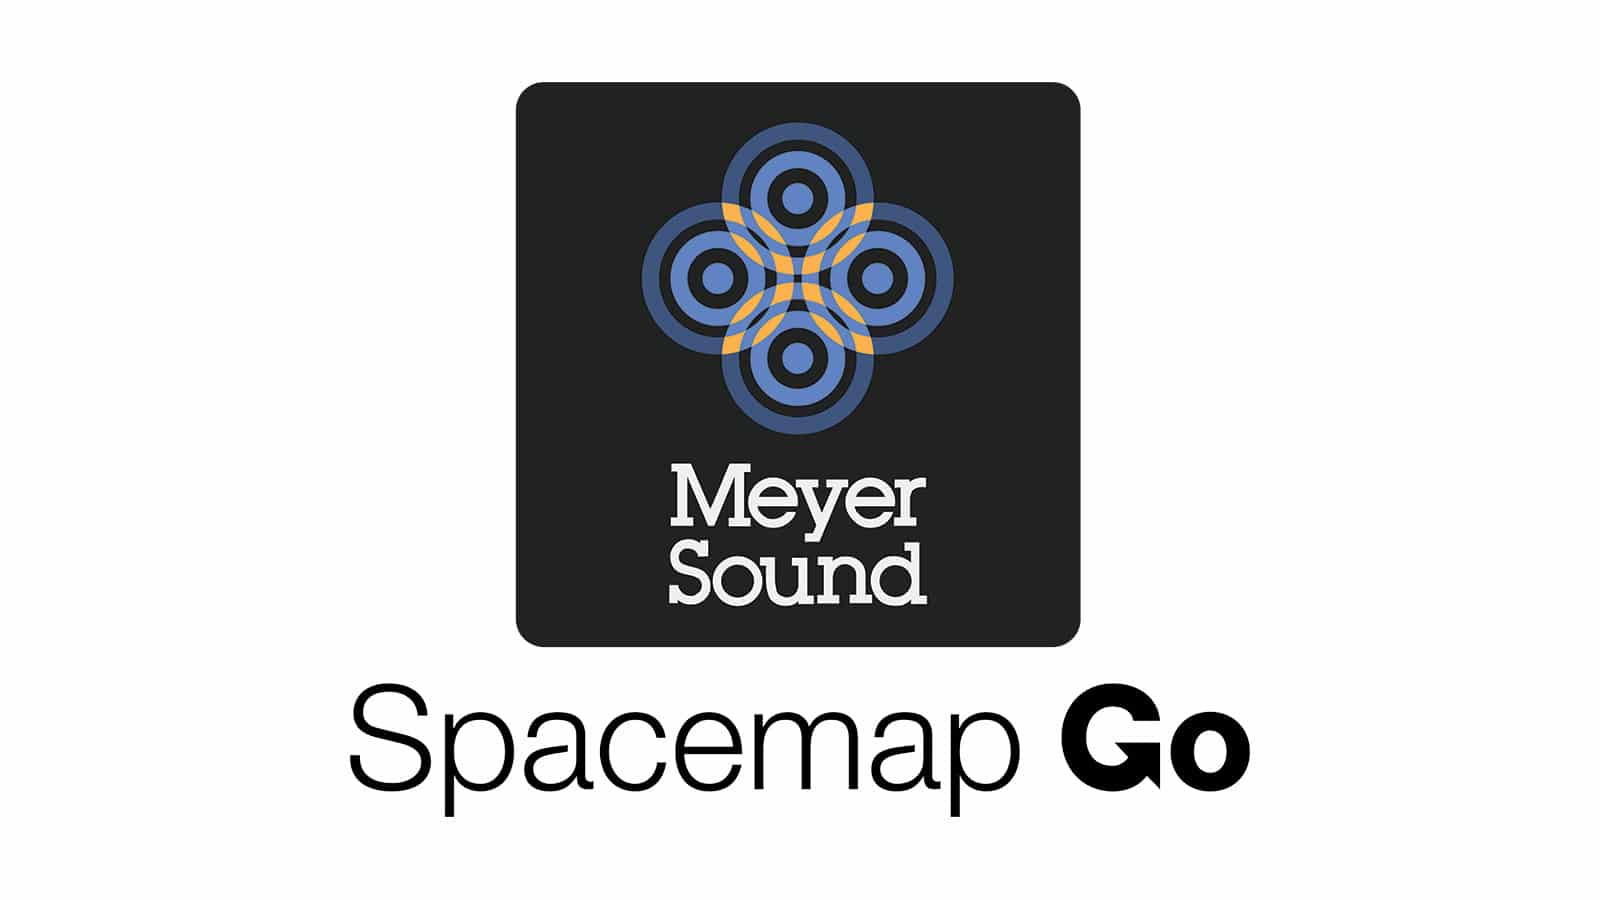 Spacemap Go Spatial Sound Design and Live Mixing Tool